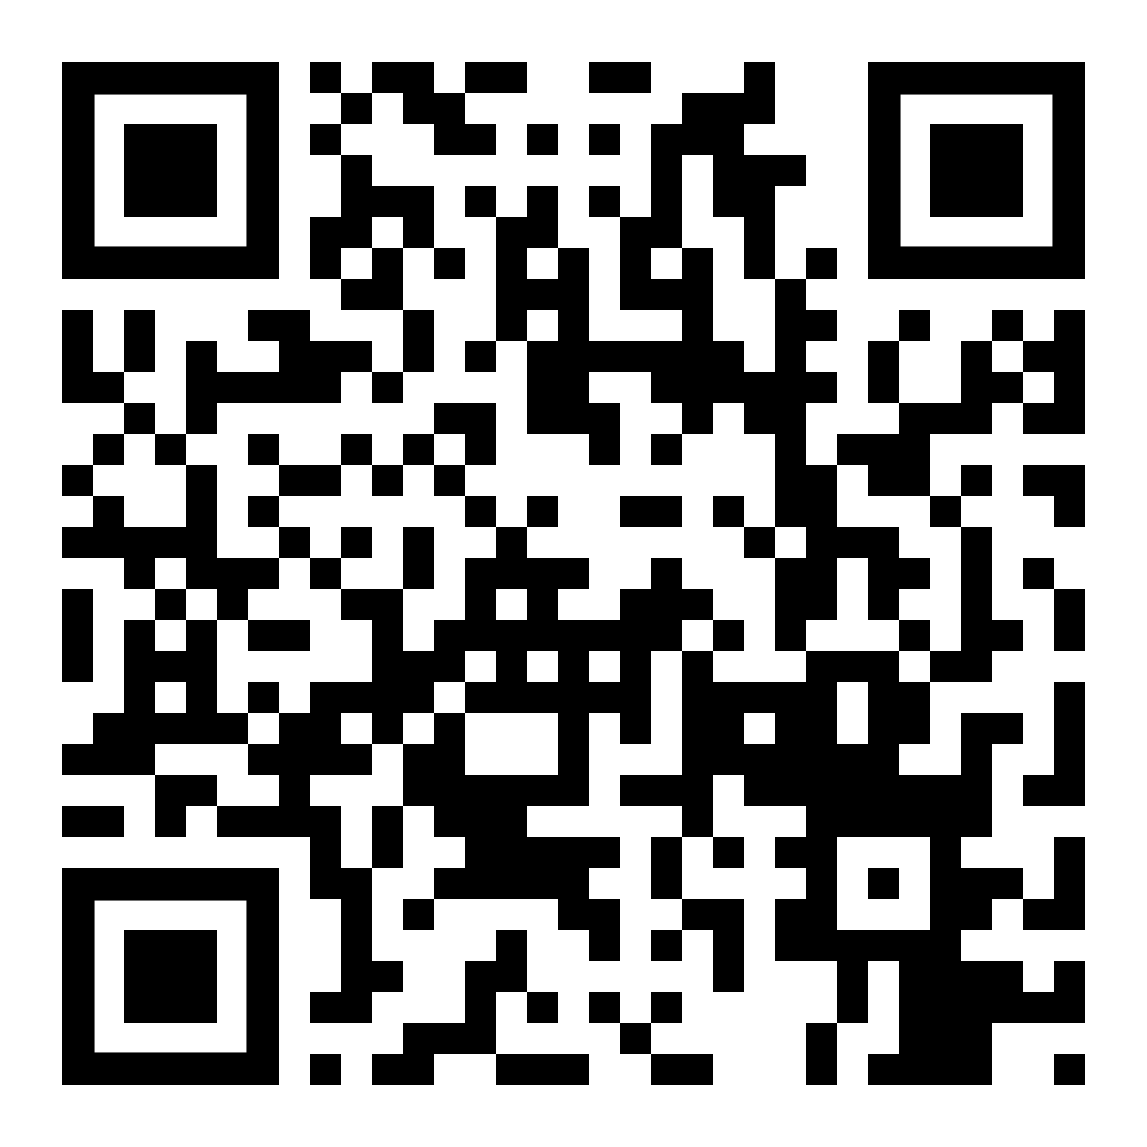 Android QR code